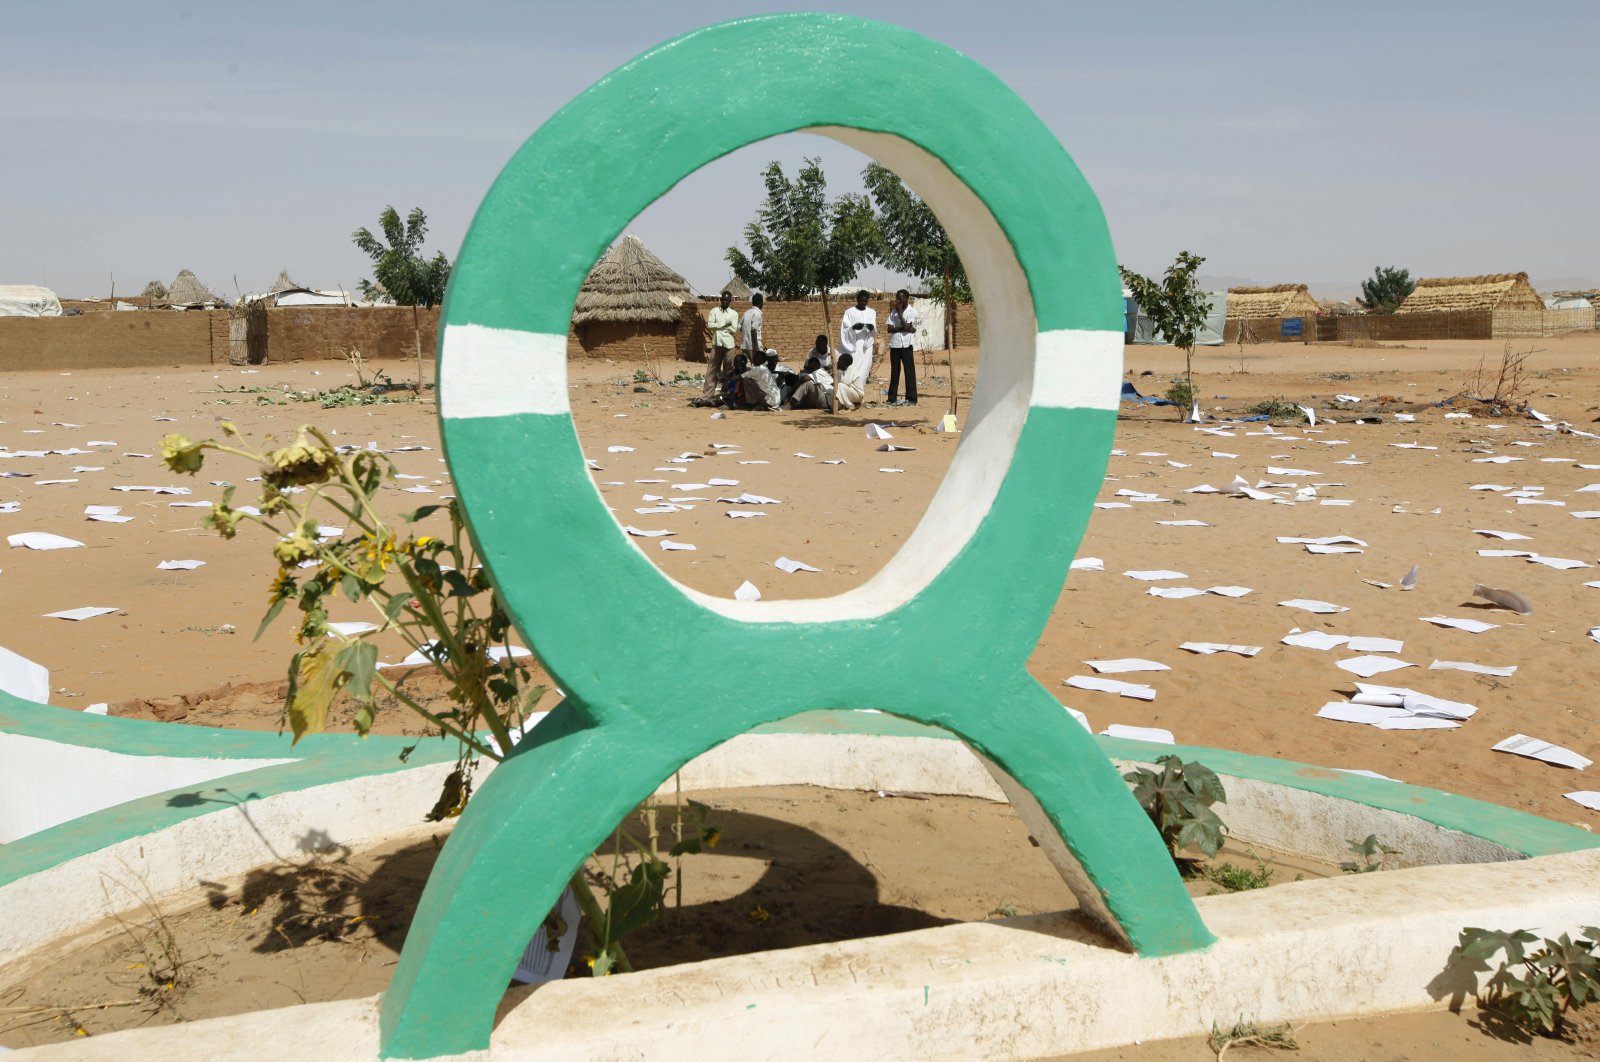 Sudanese refugees gather behind the Oxfam logo at al-Salam refugee camp, outside the Darfur town of al-Fasher, March 21, 2009. (AP Photo)